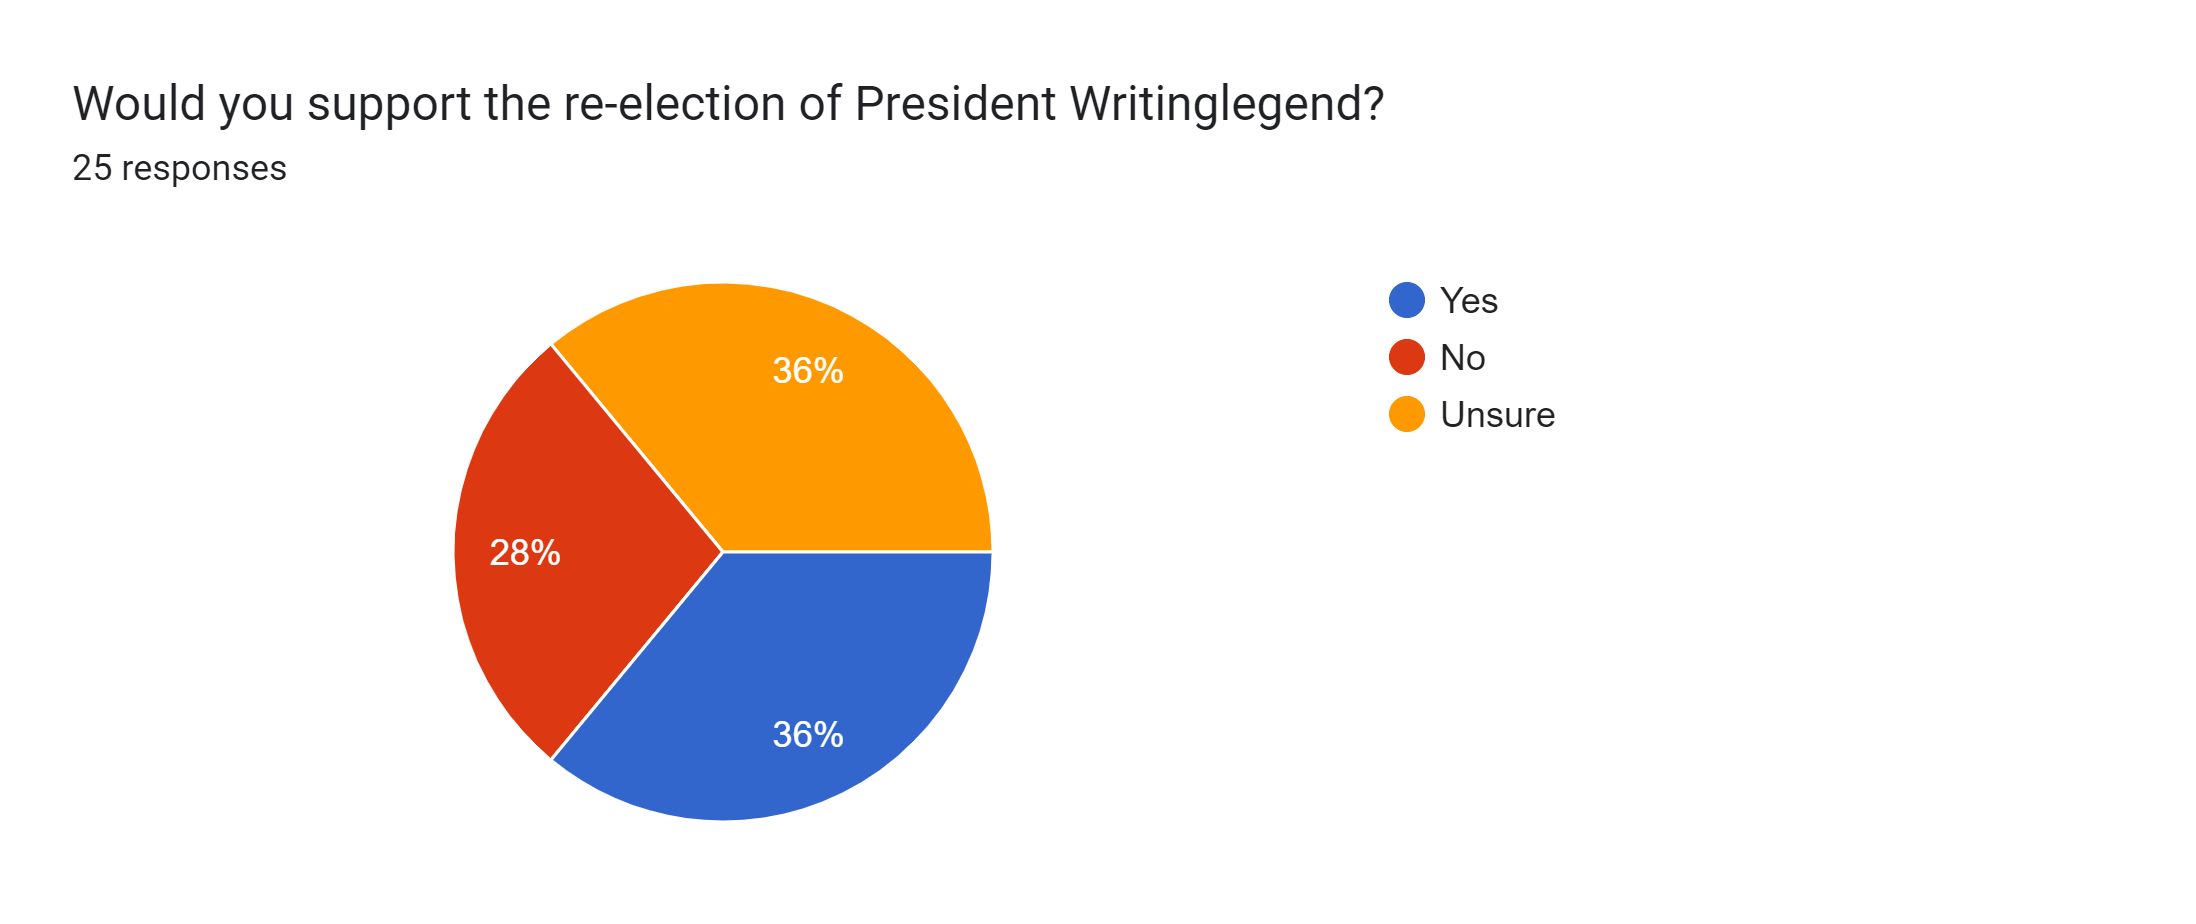 Forms response chart. Question title: Would you support the re-election of President Writinglegend?. Number of responses: 25 responses.